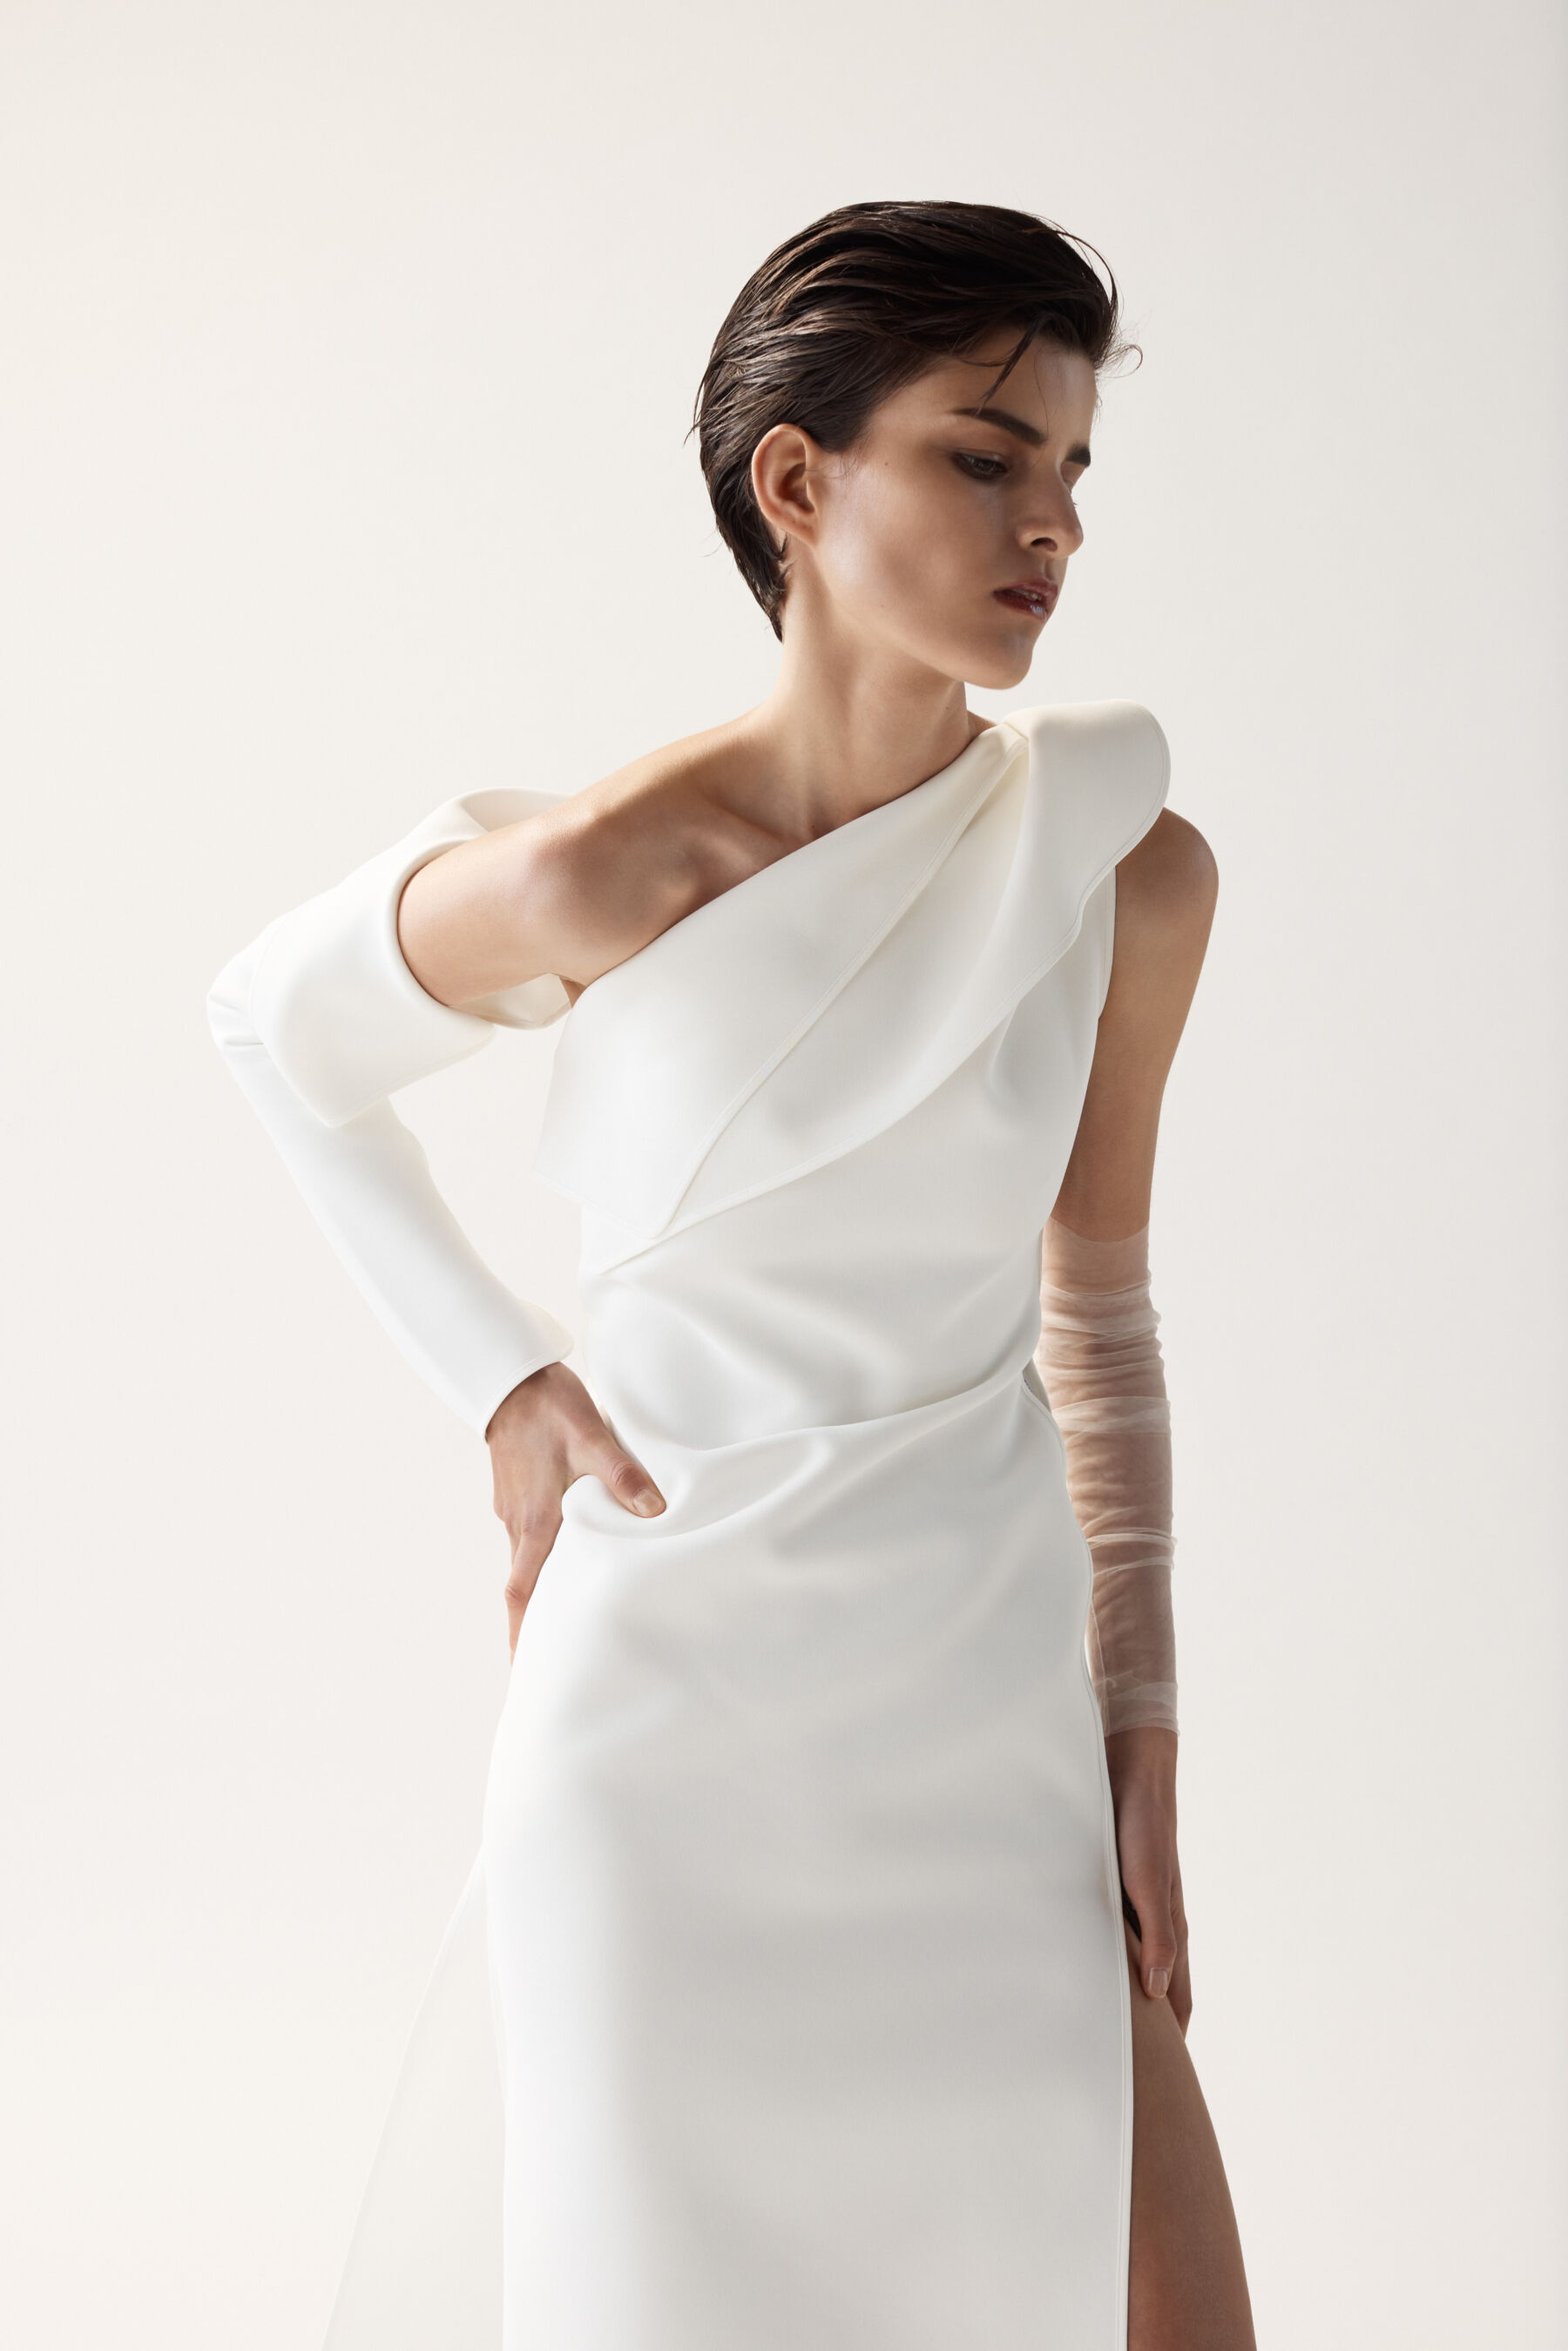 Archer by Toni Maticevski, available at Miss Bush in Surrey, UK